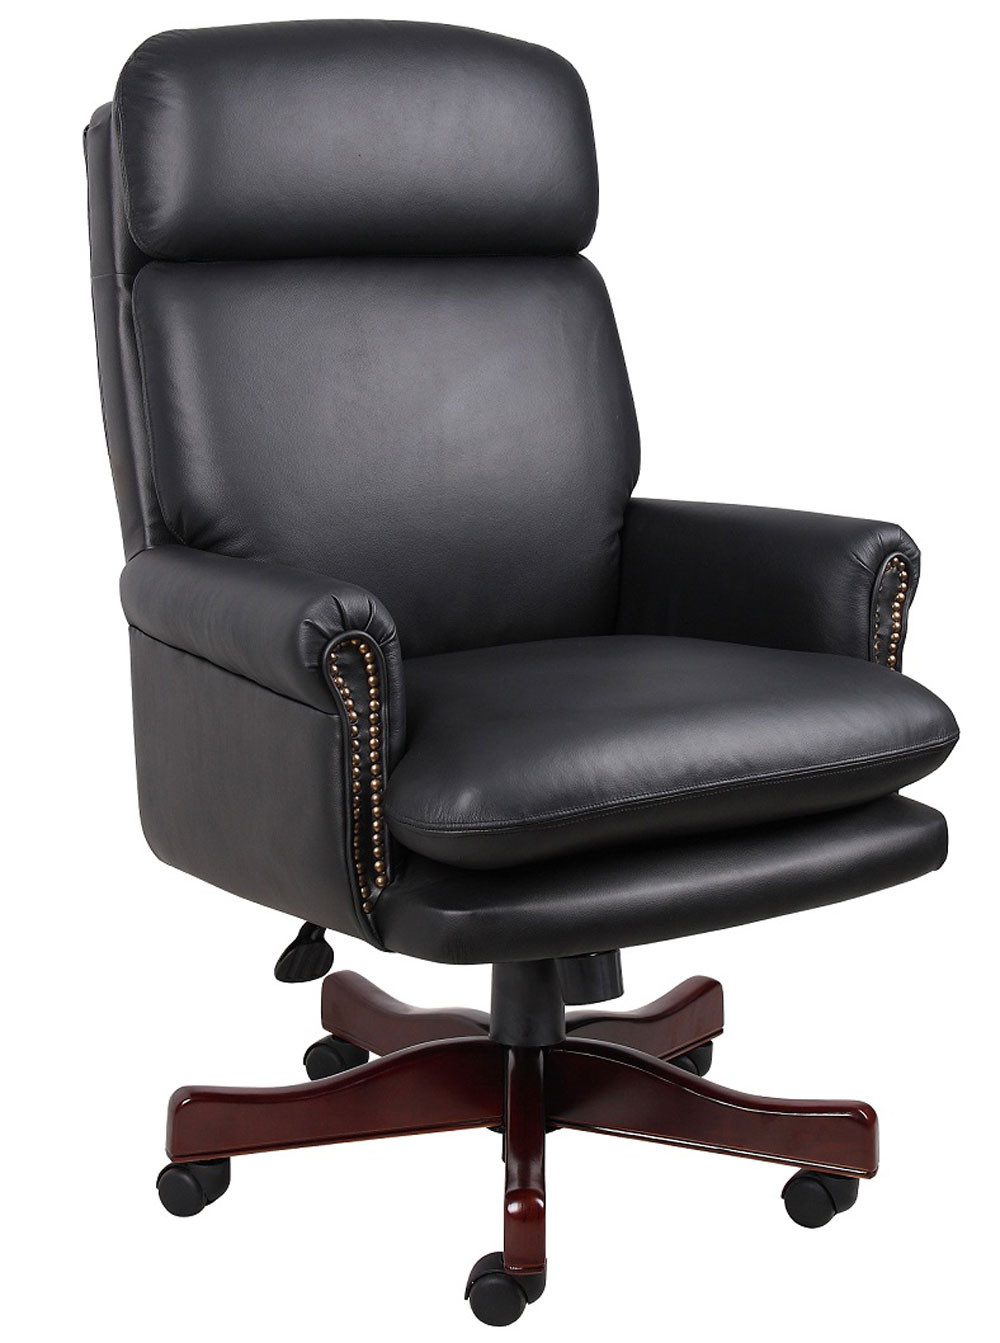 Best ideas about Executive Office Chair
. Save or Pin Executive fice Chairs for fice Now.